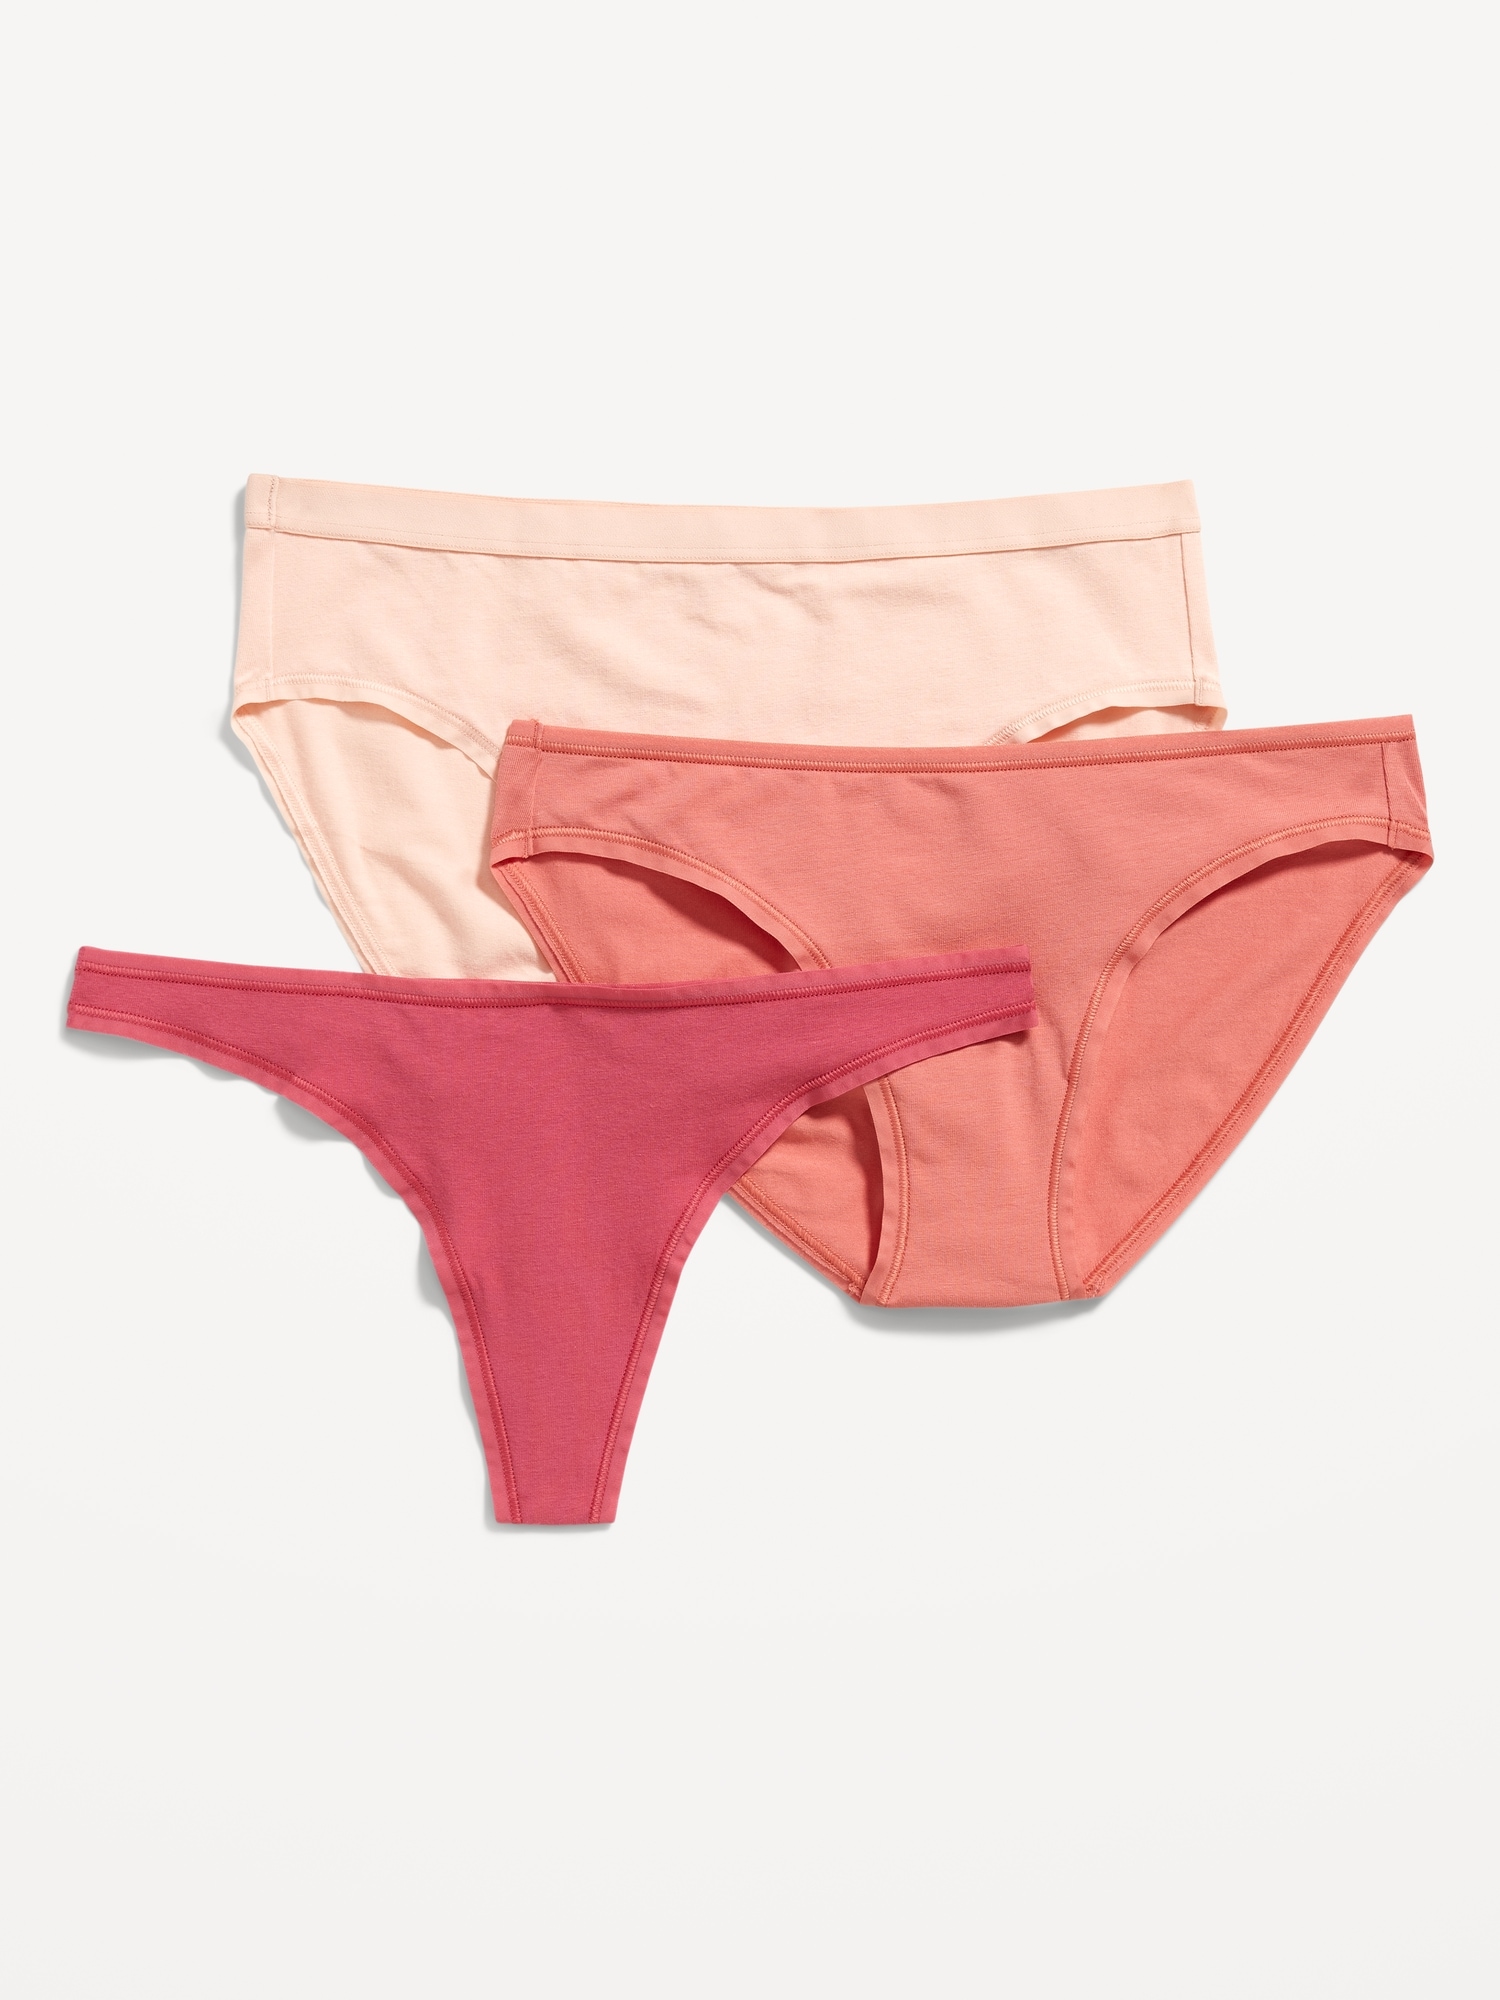 Cotten Female Ladies Used Panty, Packaging Type: Bundle, Size: Mix